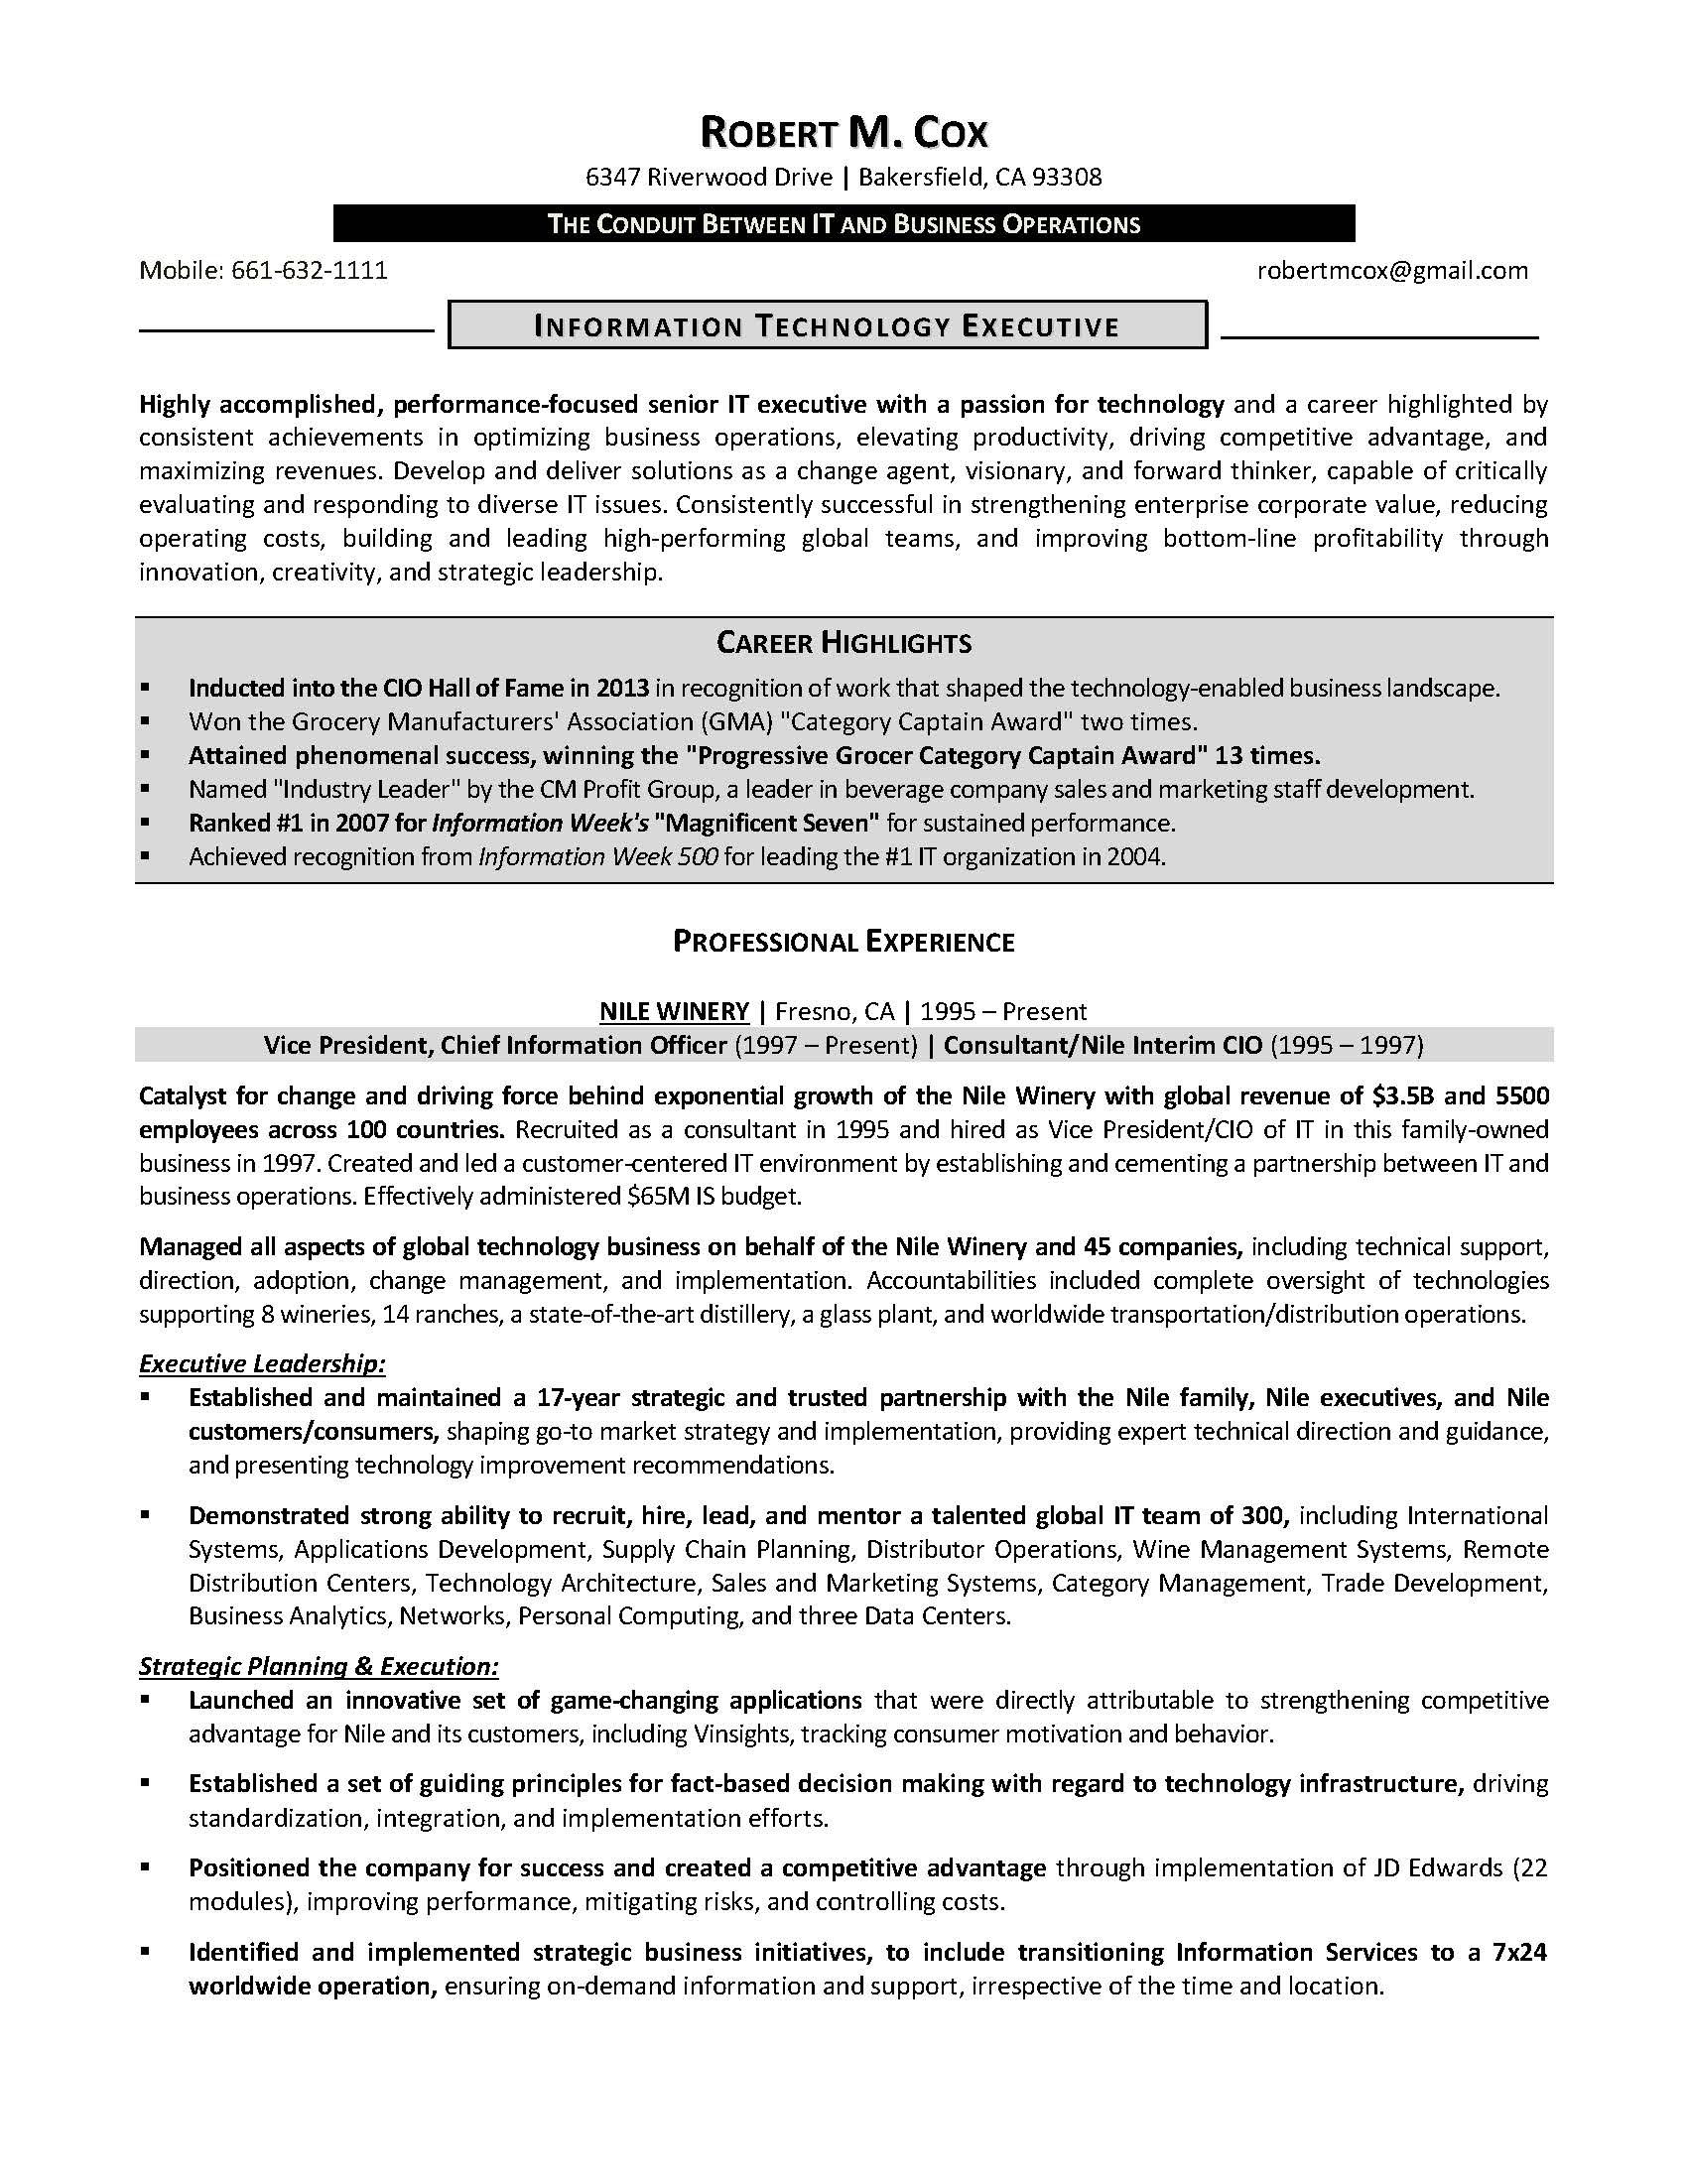 IT resume sample 3, provided by Elite Resume Writing Services